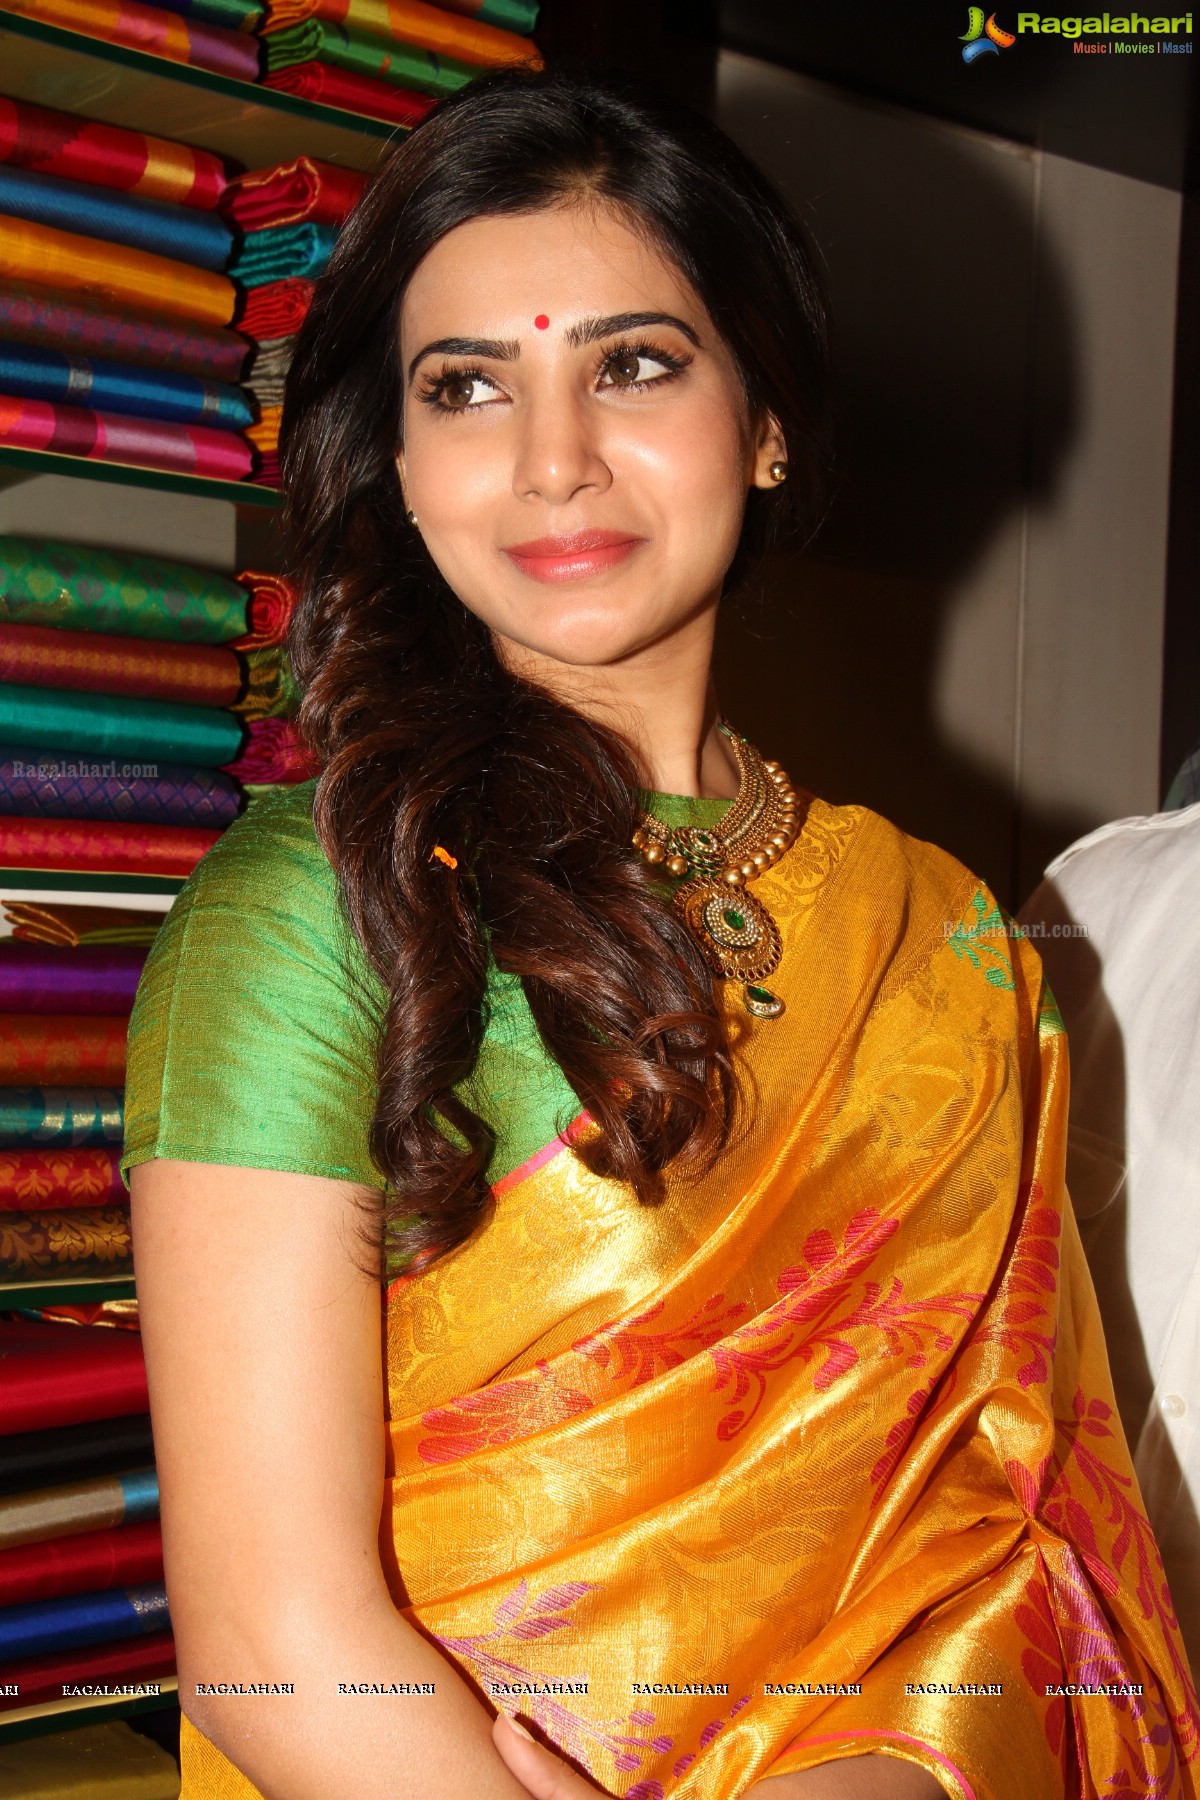 Samantha launches South India Shopping Mall at Ameerpet, Hyderabad